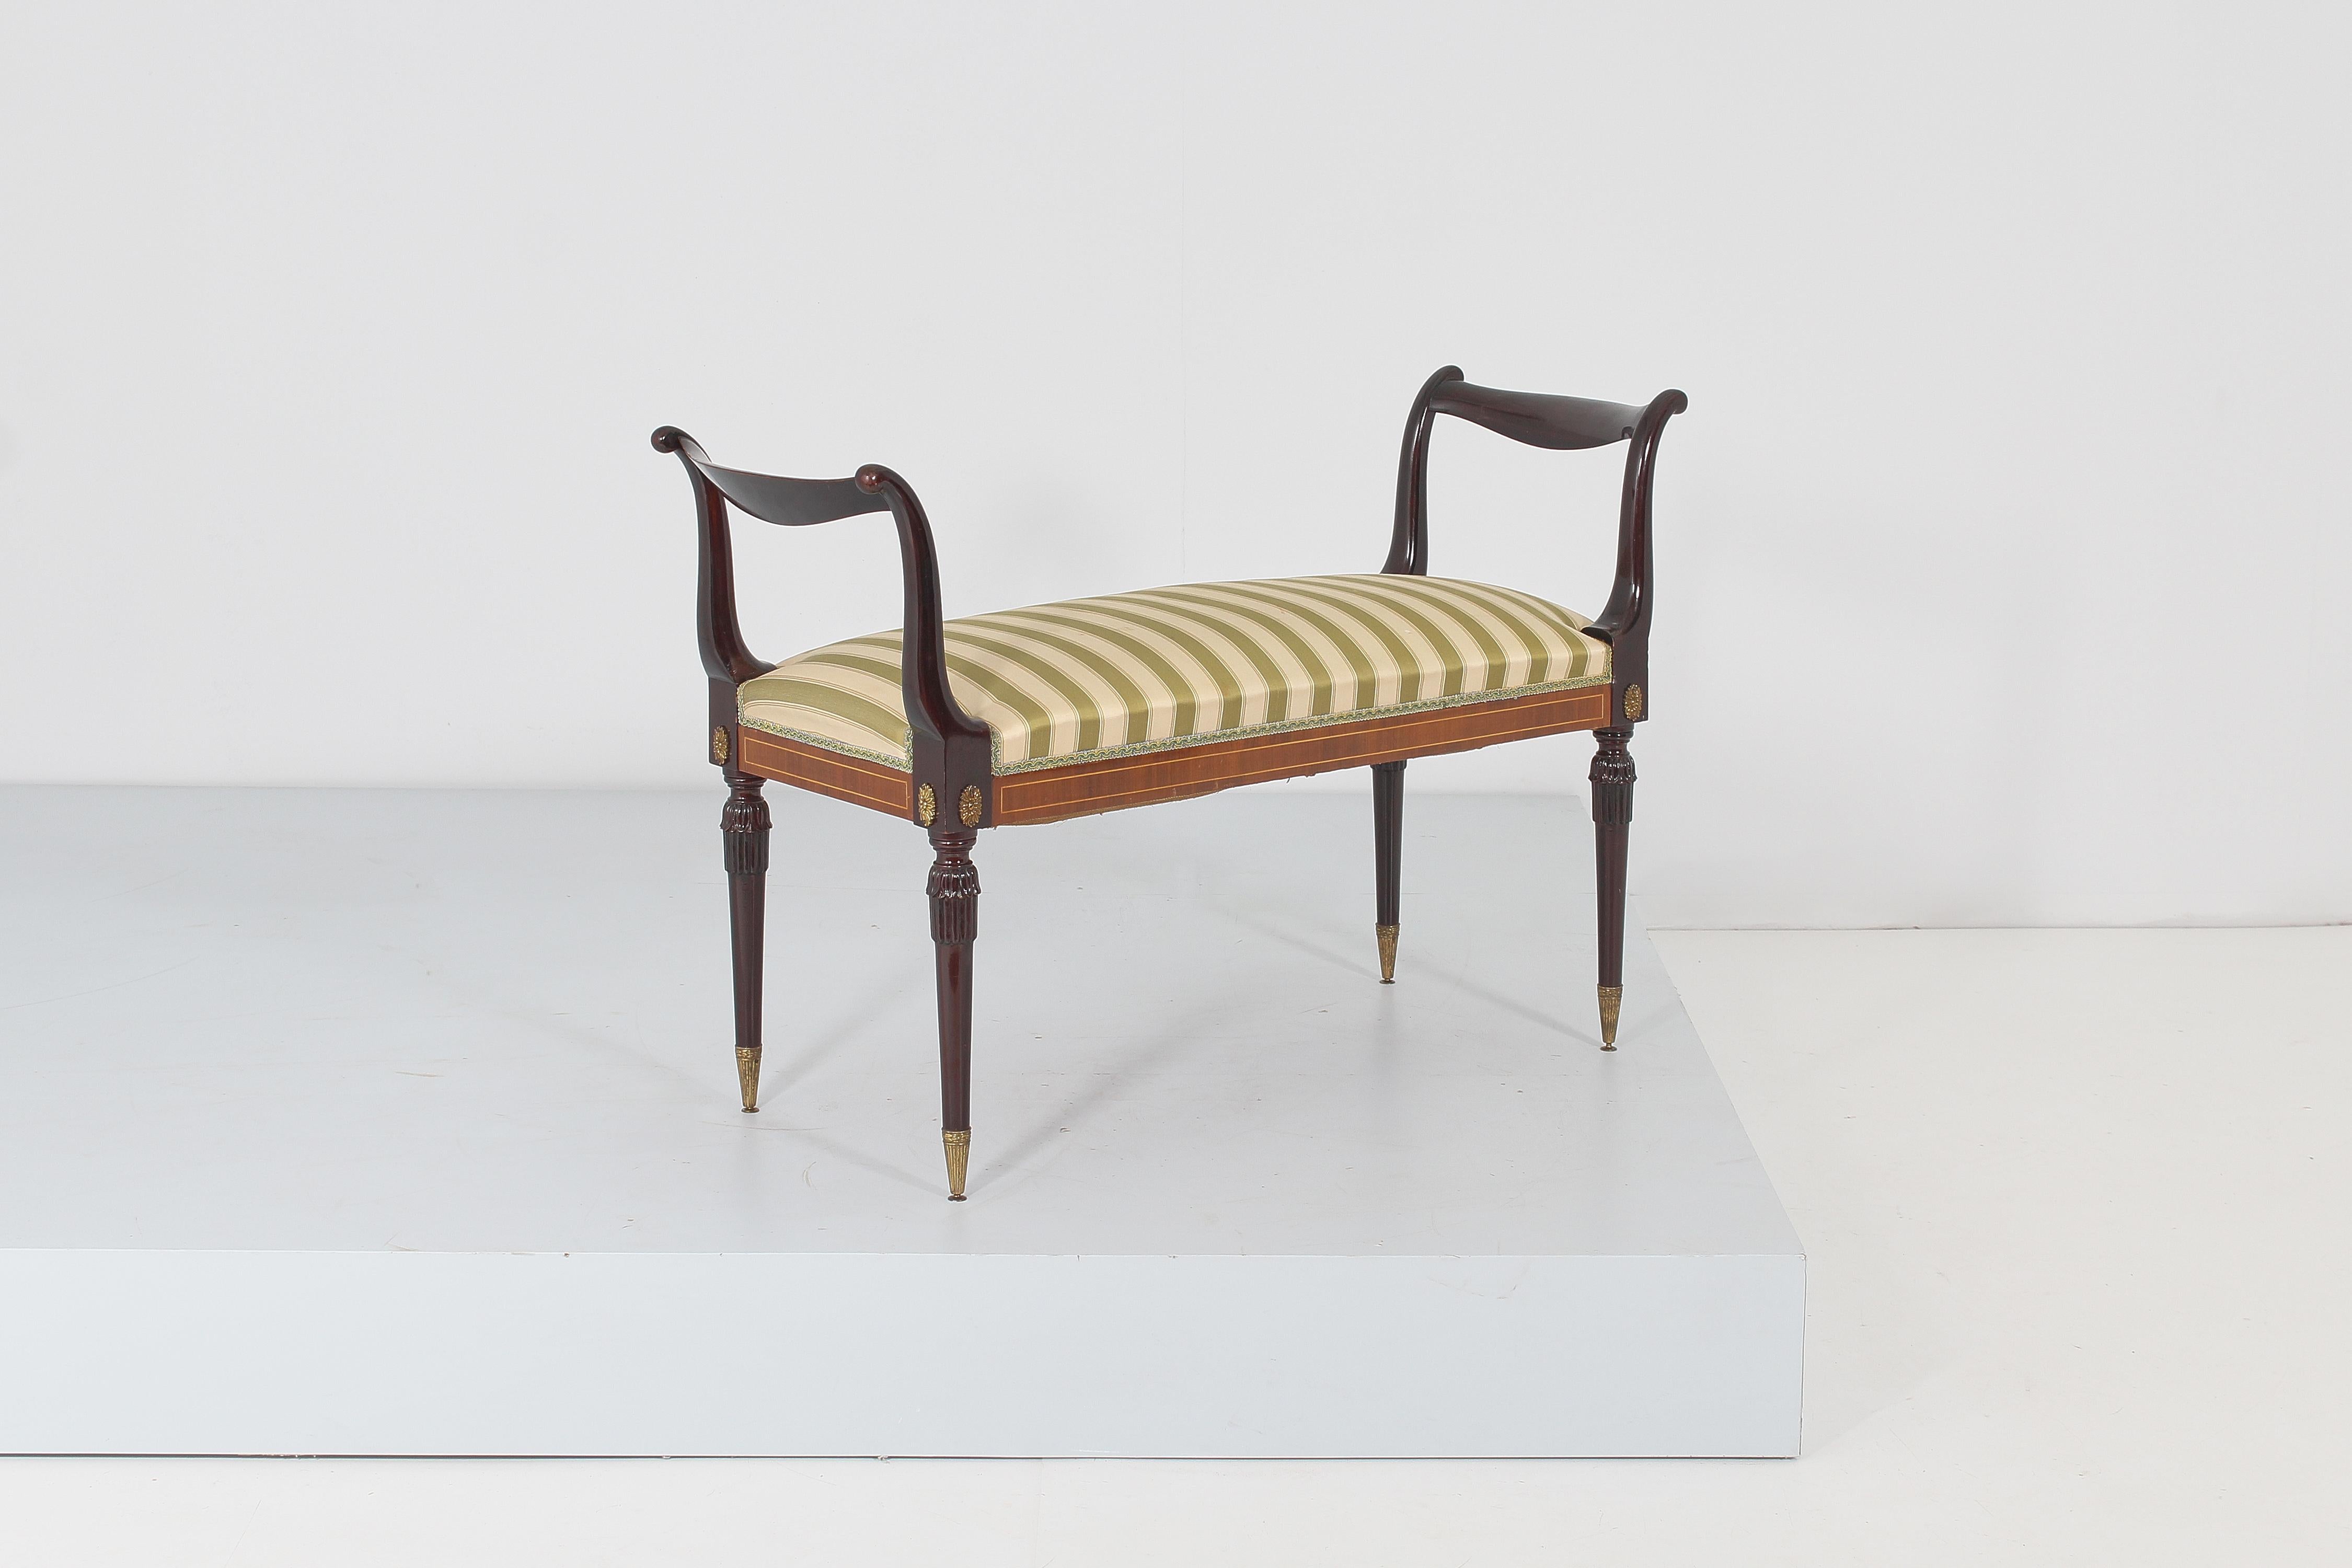 Very rare and stylish bench made of wood, curved on the armrests, with padded seat lined in cream-colored satin with vertical bands,
Attributed to Emilio Lancia, Italy in the 1960s.


